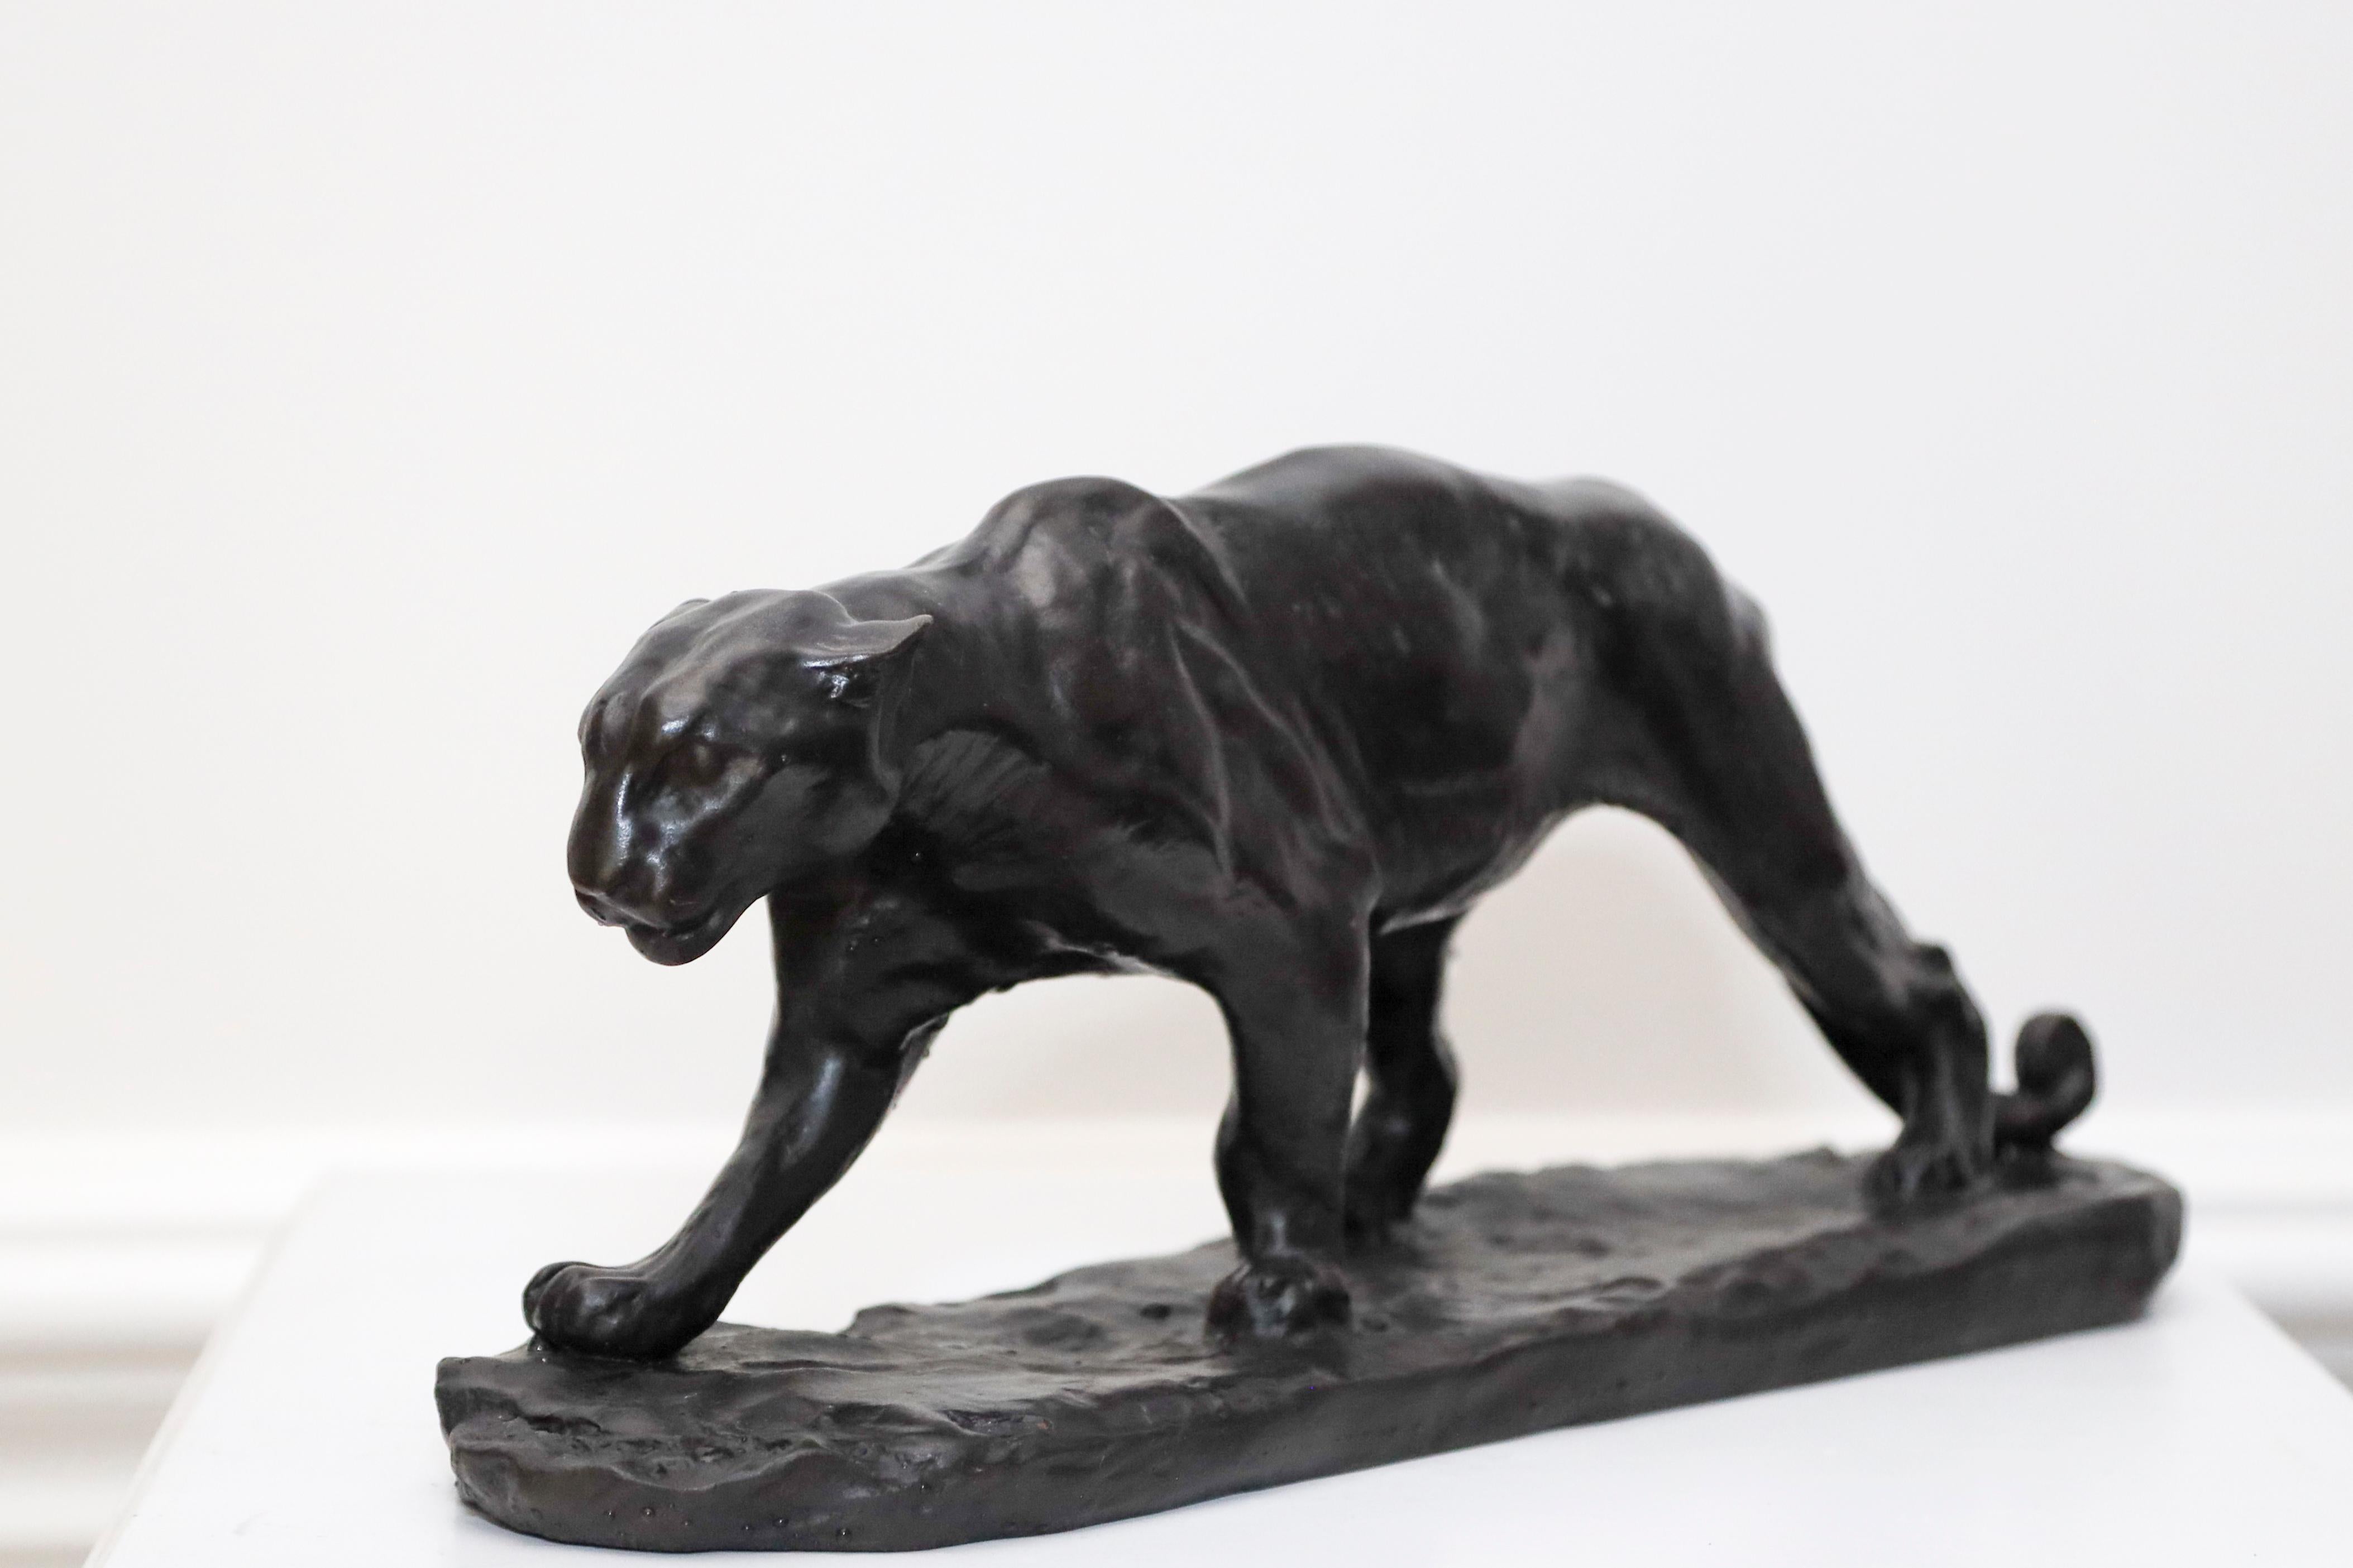 Walking Puma - Gold Figurative Sculpture by Charles Rumsey